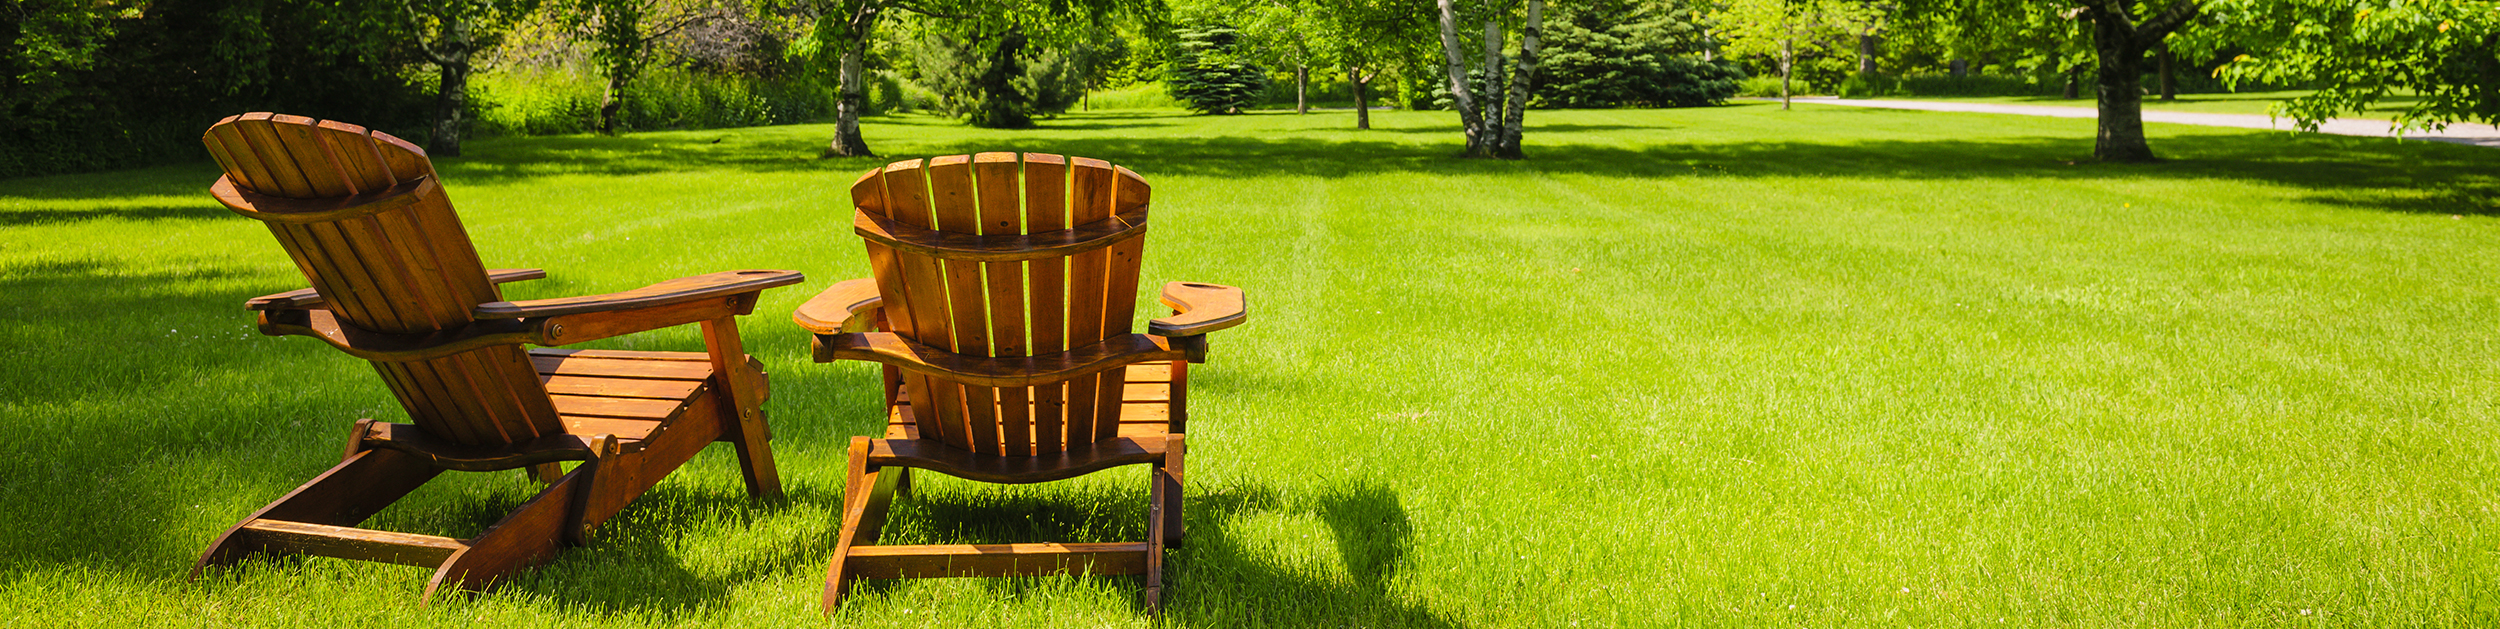 beautiful expansive lawn shown with two adirondack chairs